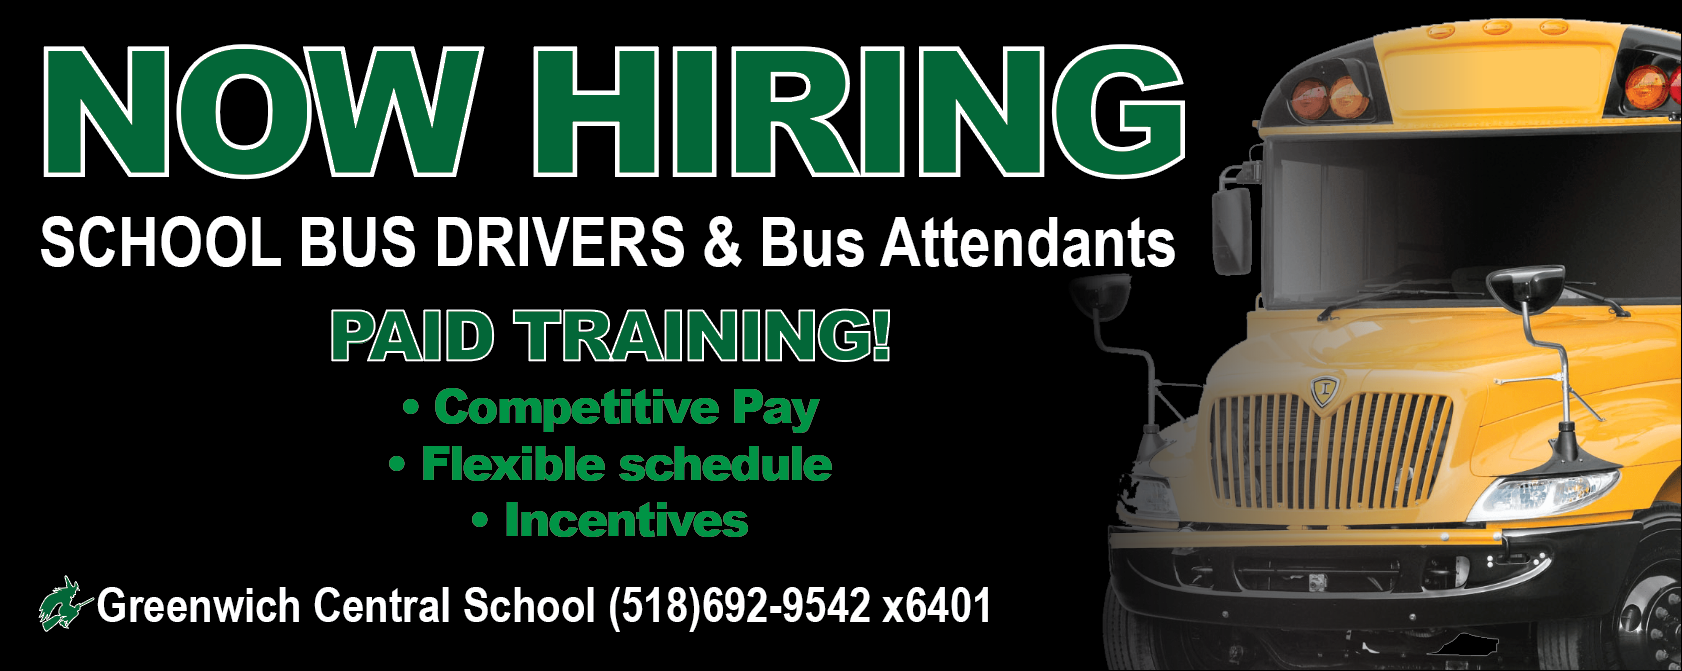 bus drivers wanted graphic